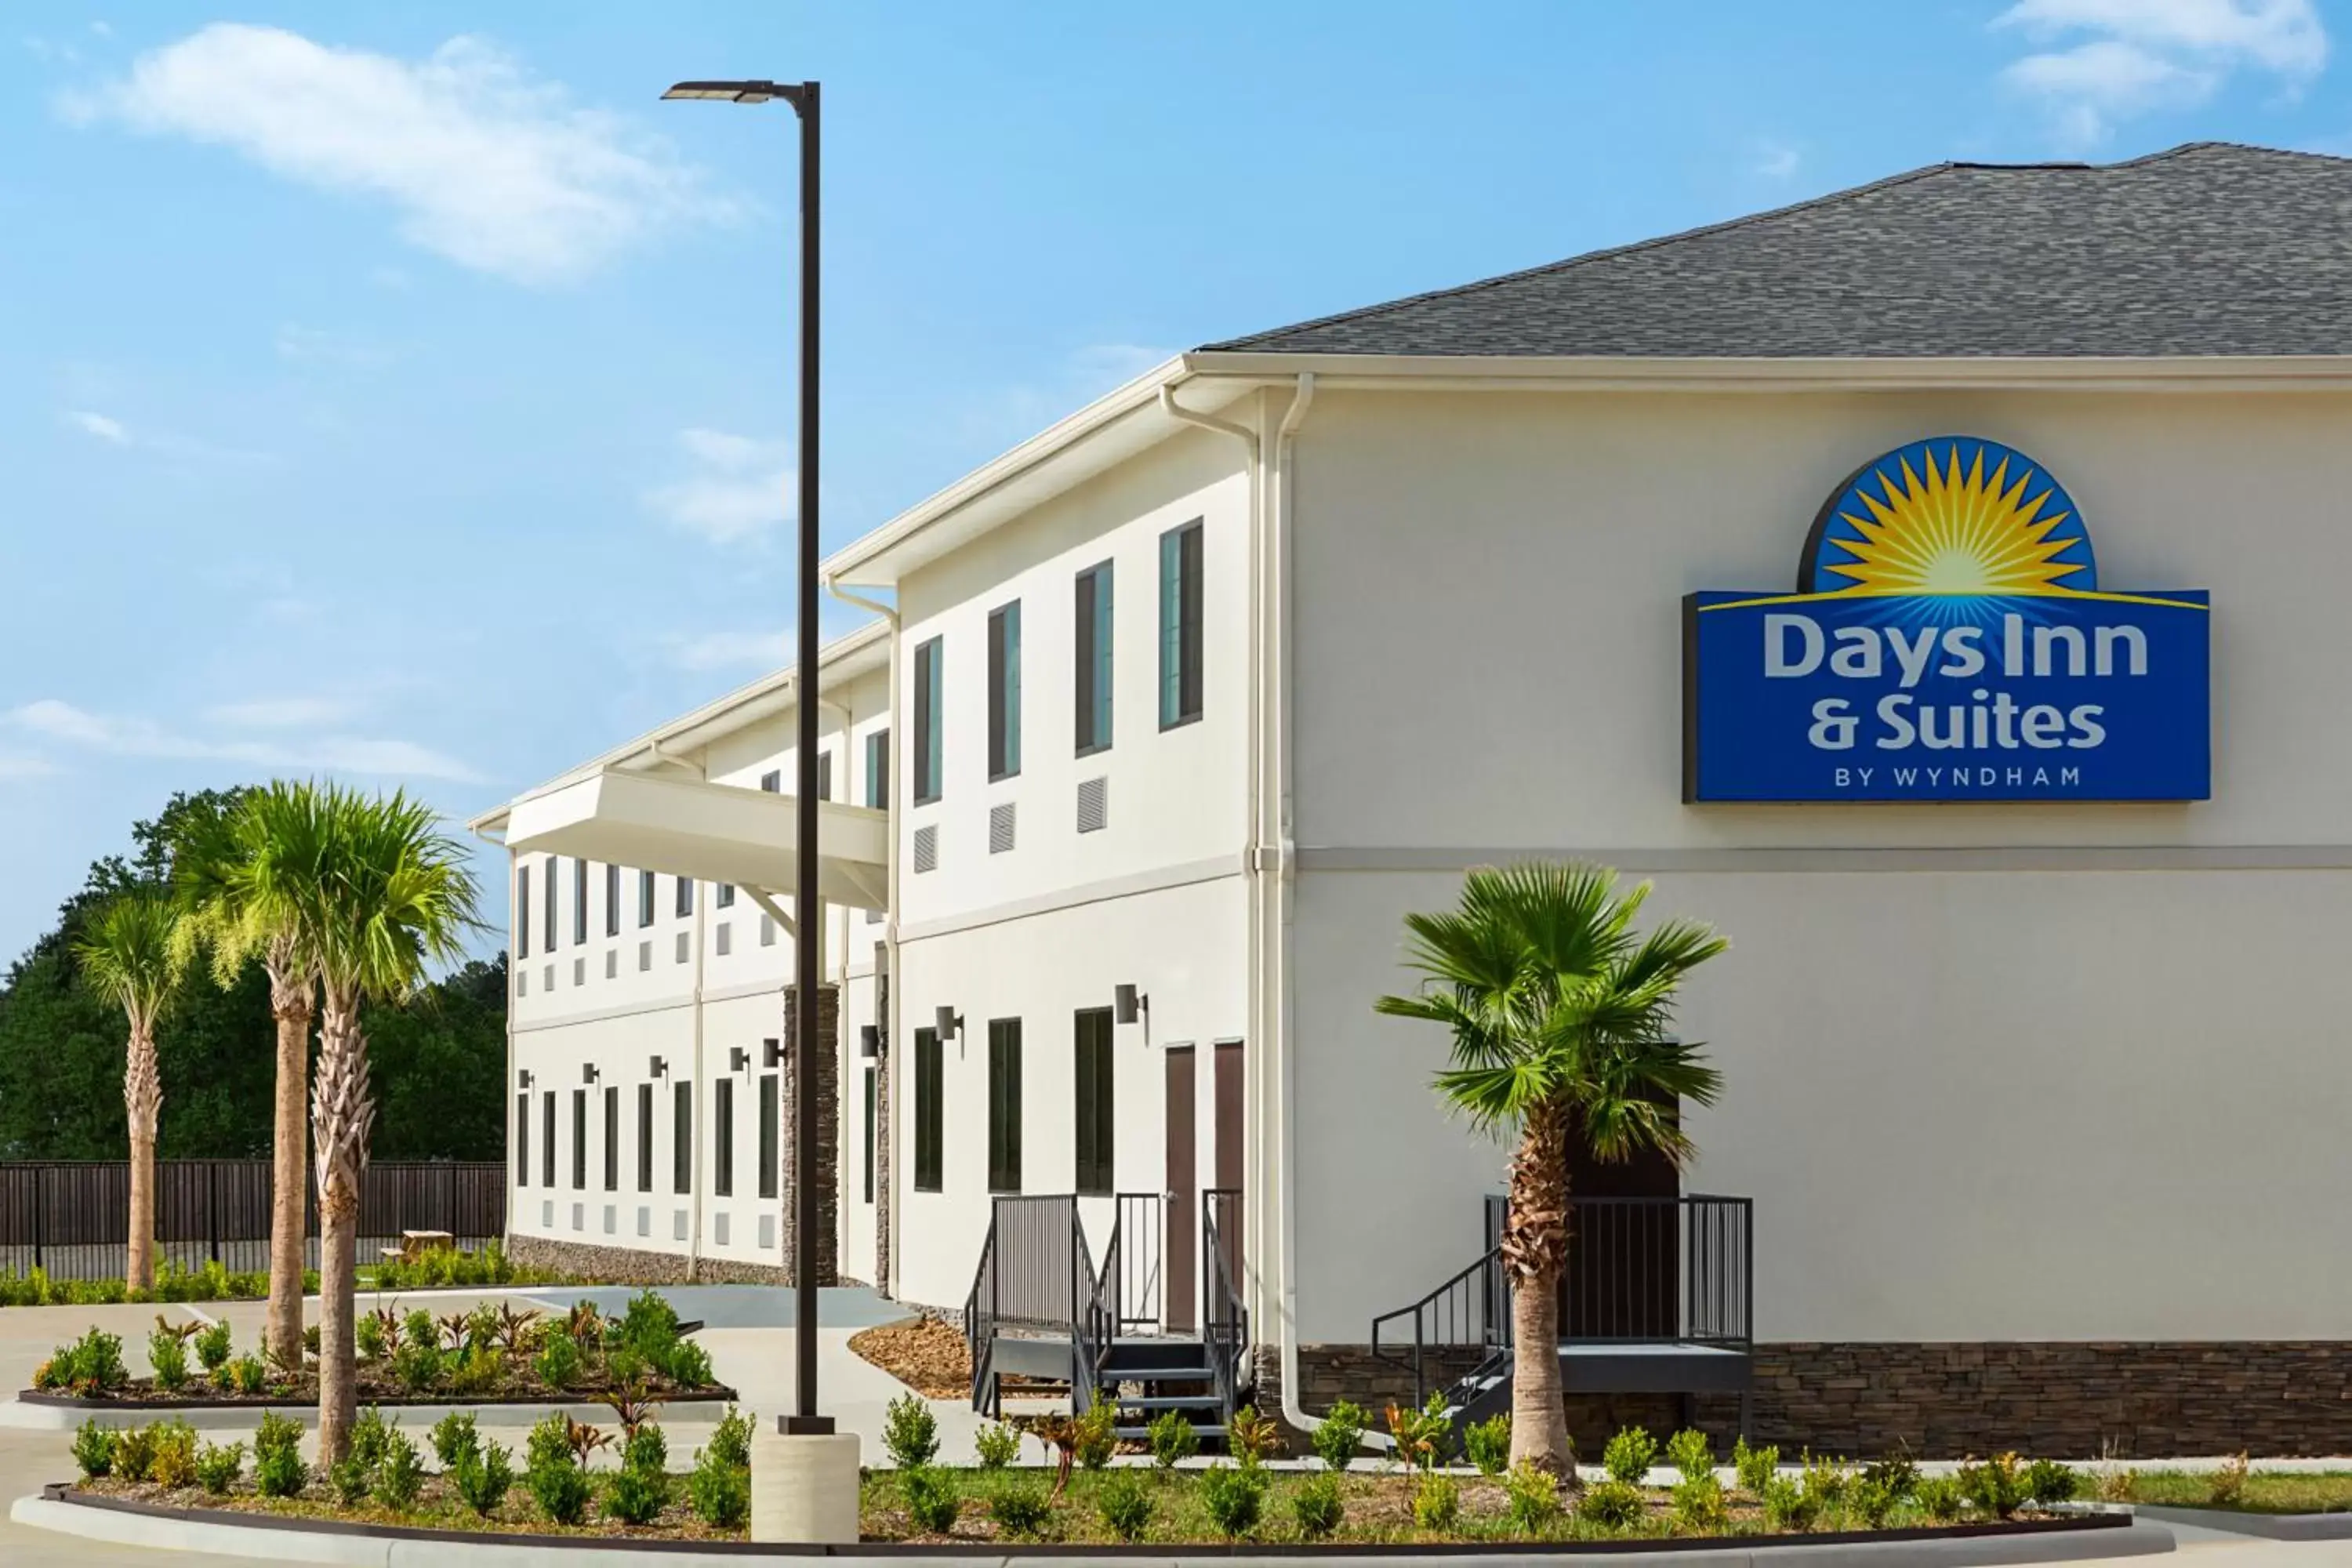 Property Building in Days Inn & Suites by Wyndham Greater Tomball